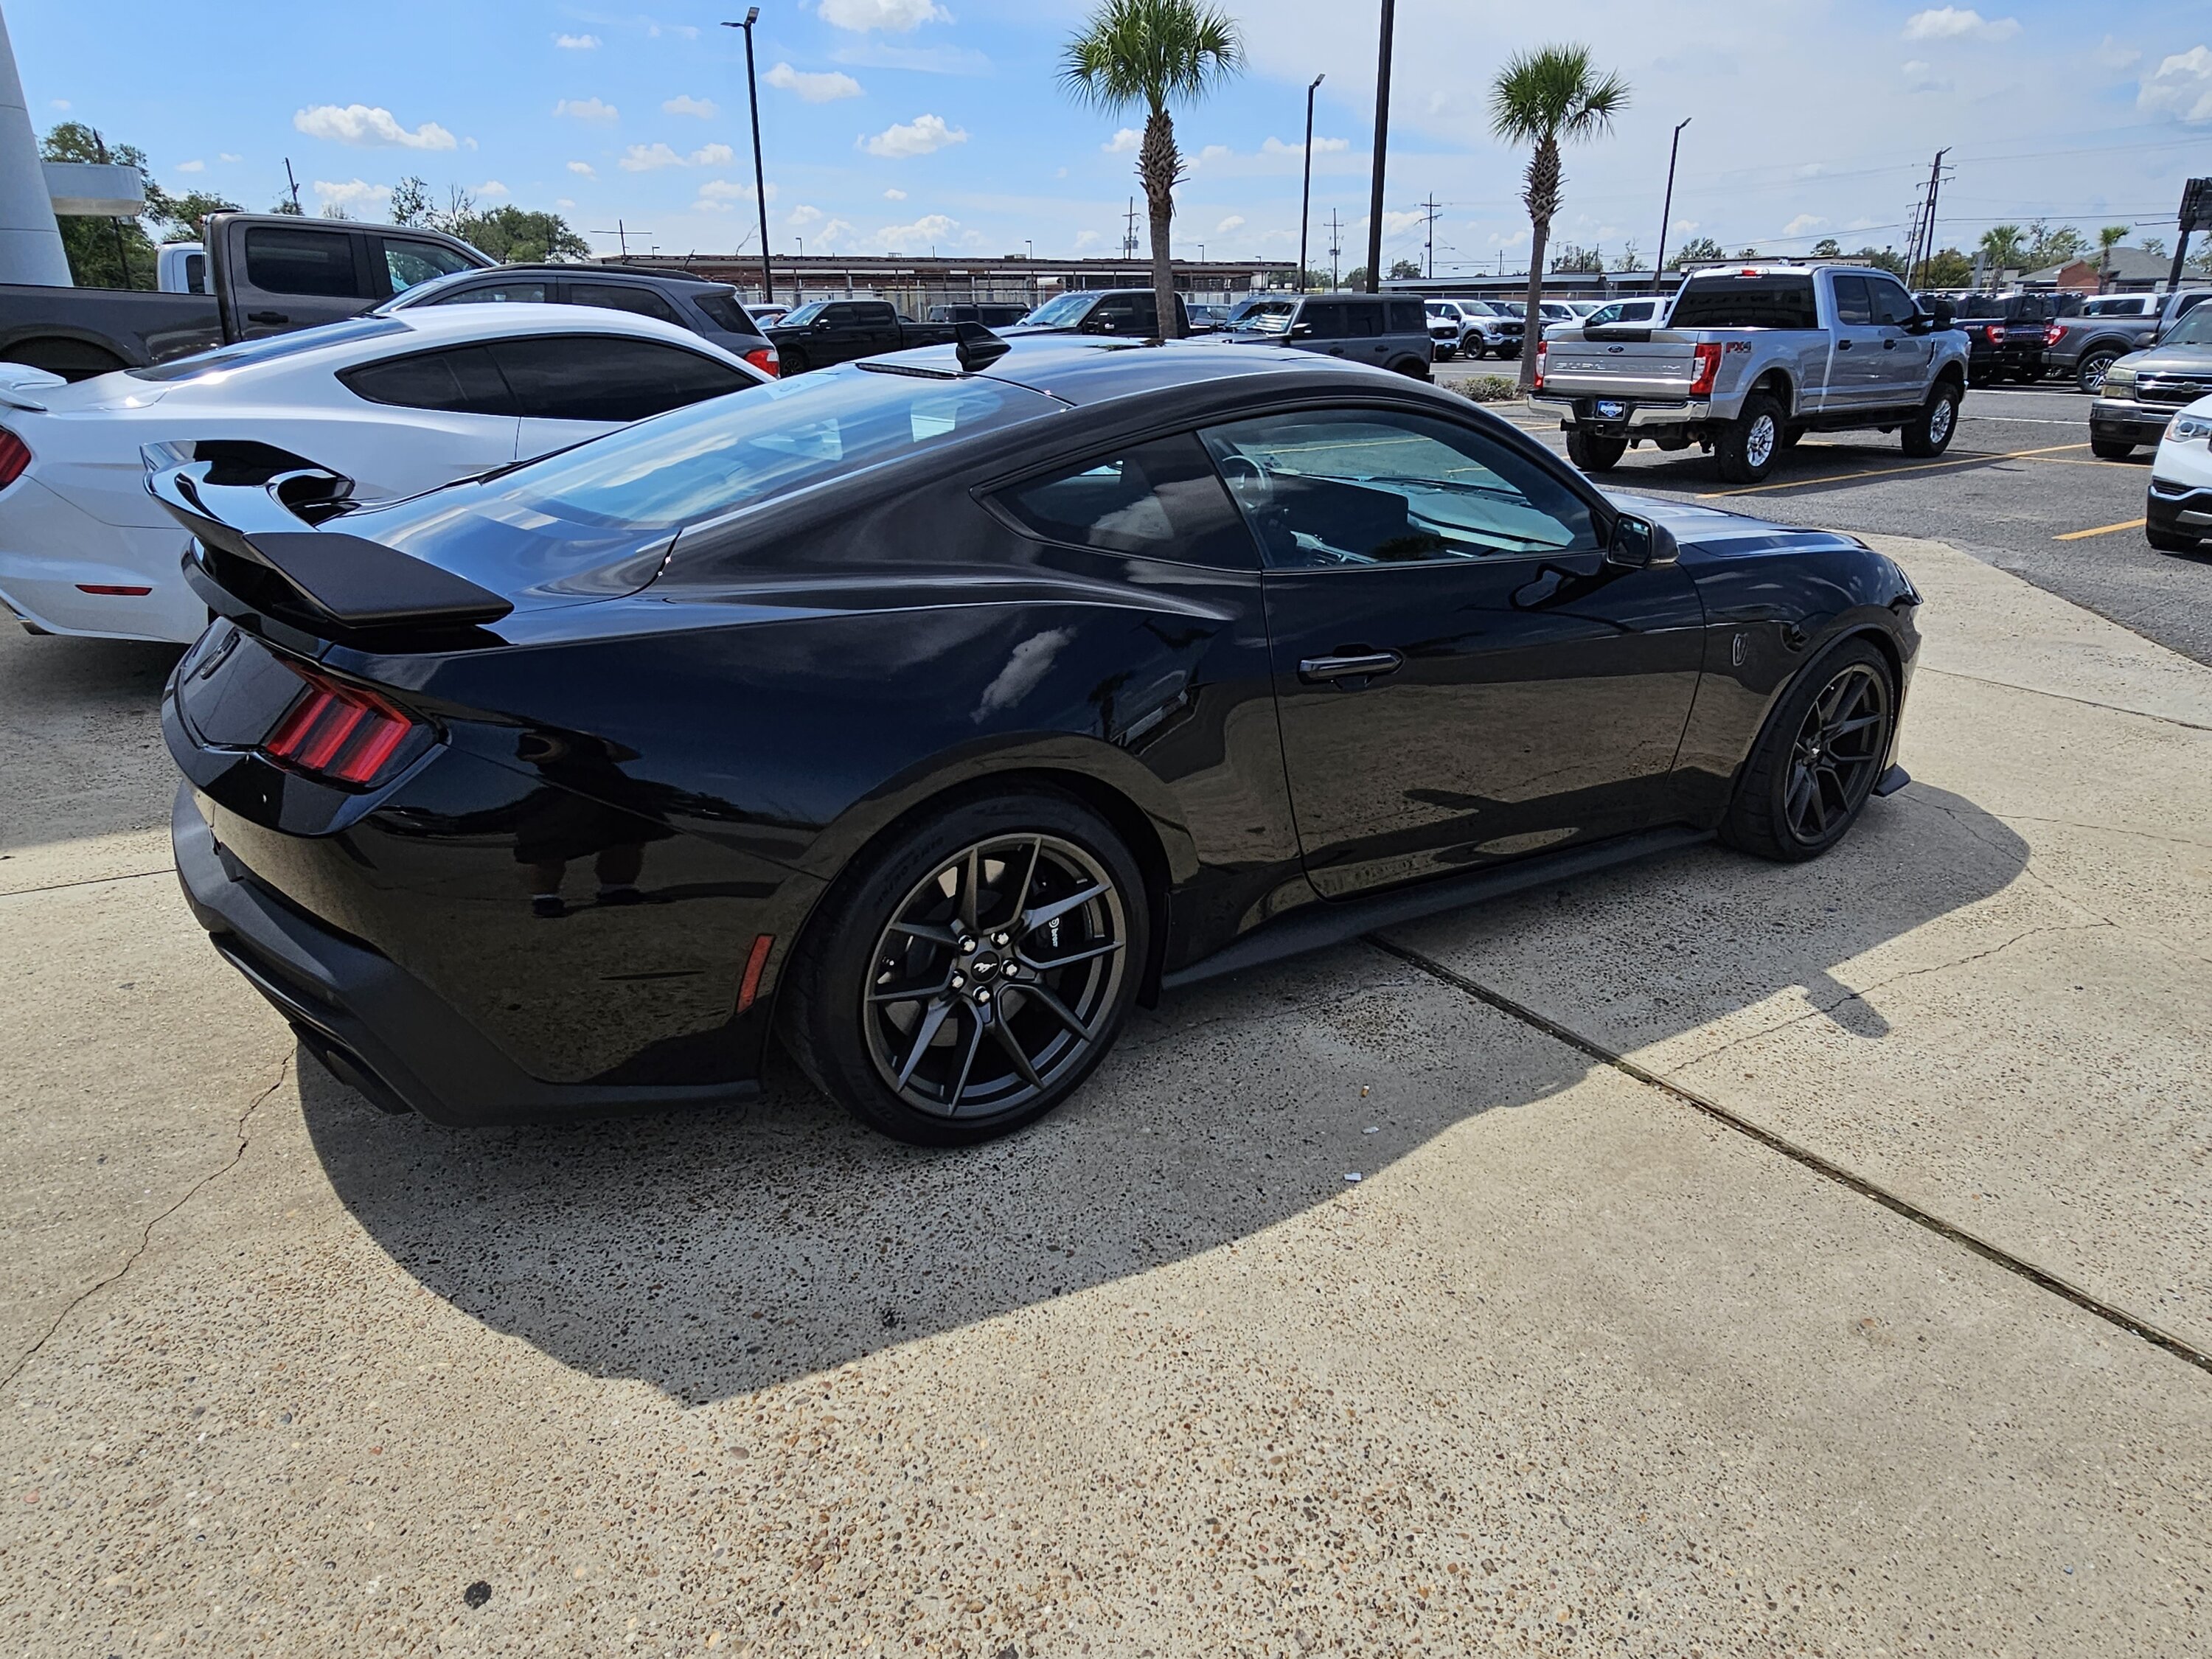 S650 Mustang Official SHADOW BLACK Mustang S650 Thread 20230916_122456